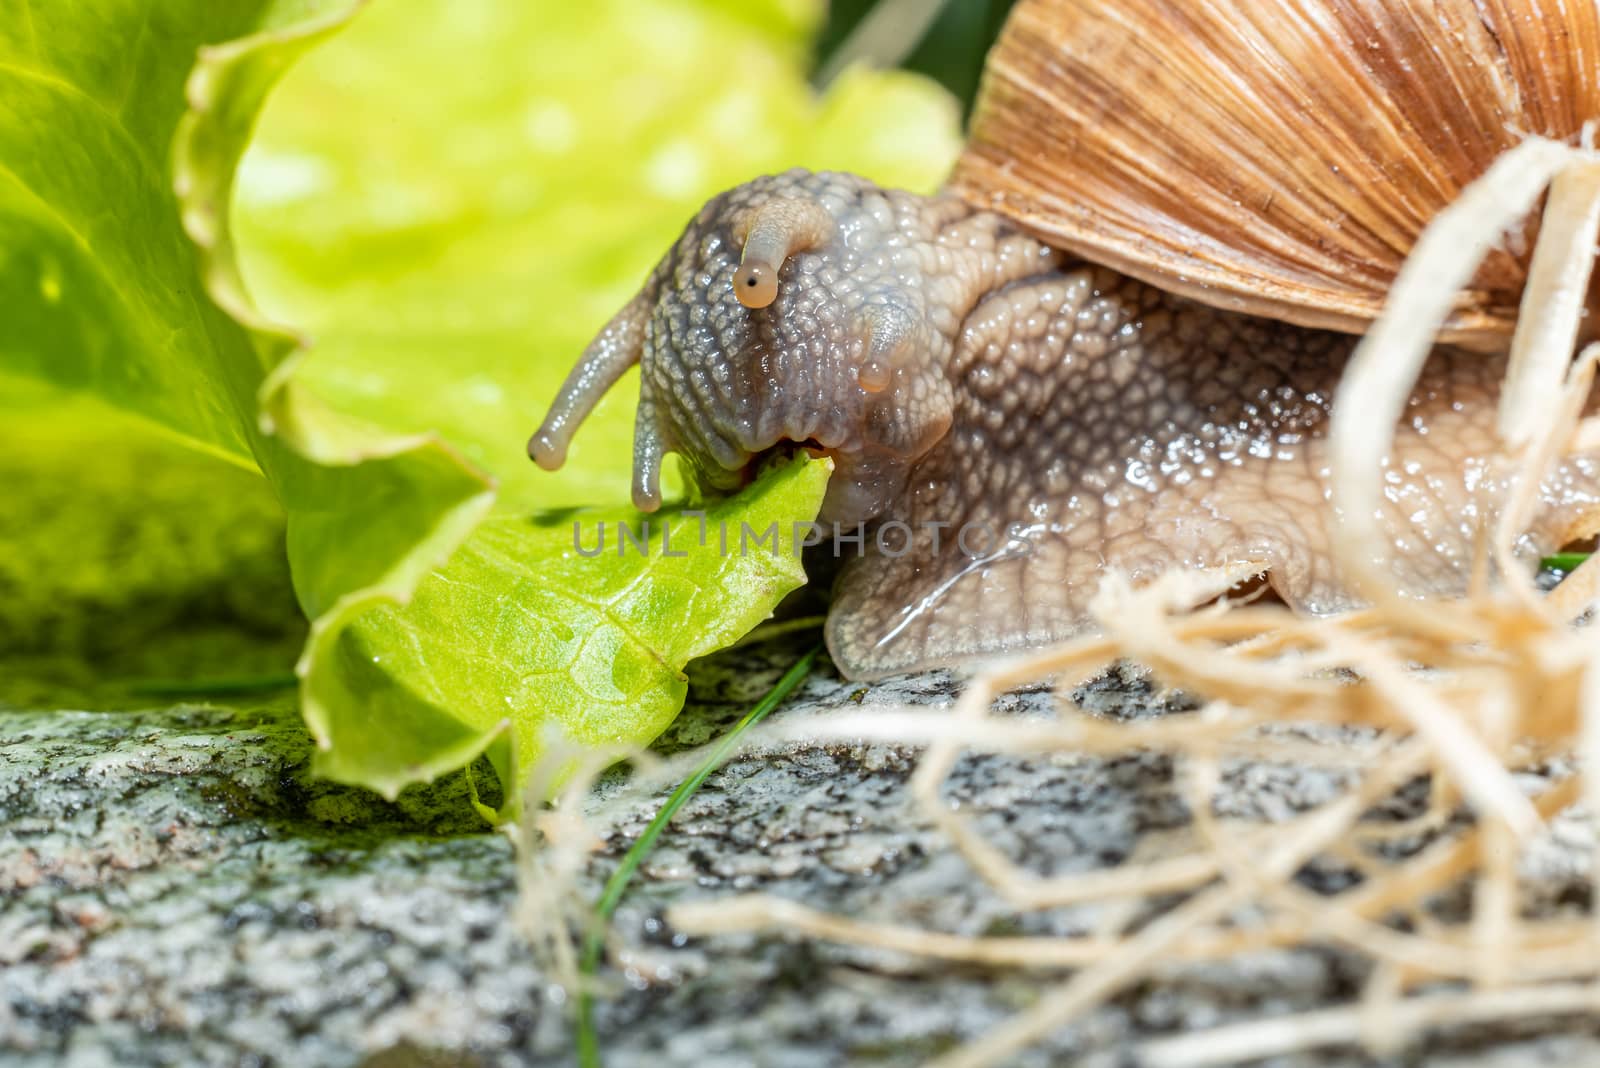 Macro close-up of a Burgundy snail eating a lettuce leaf - mouth at maximum extension and jaw perfectly visible by Umtsga